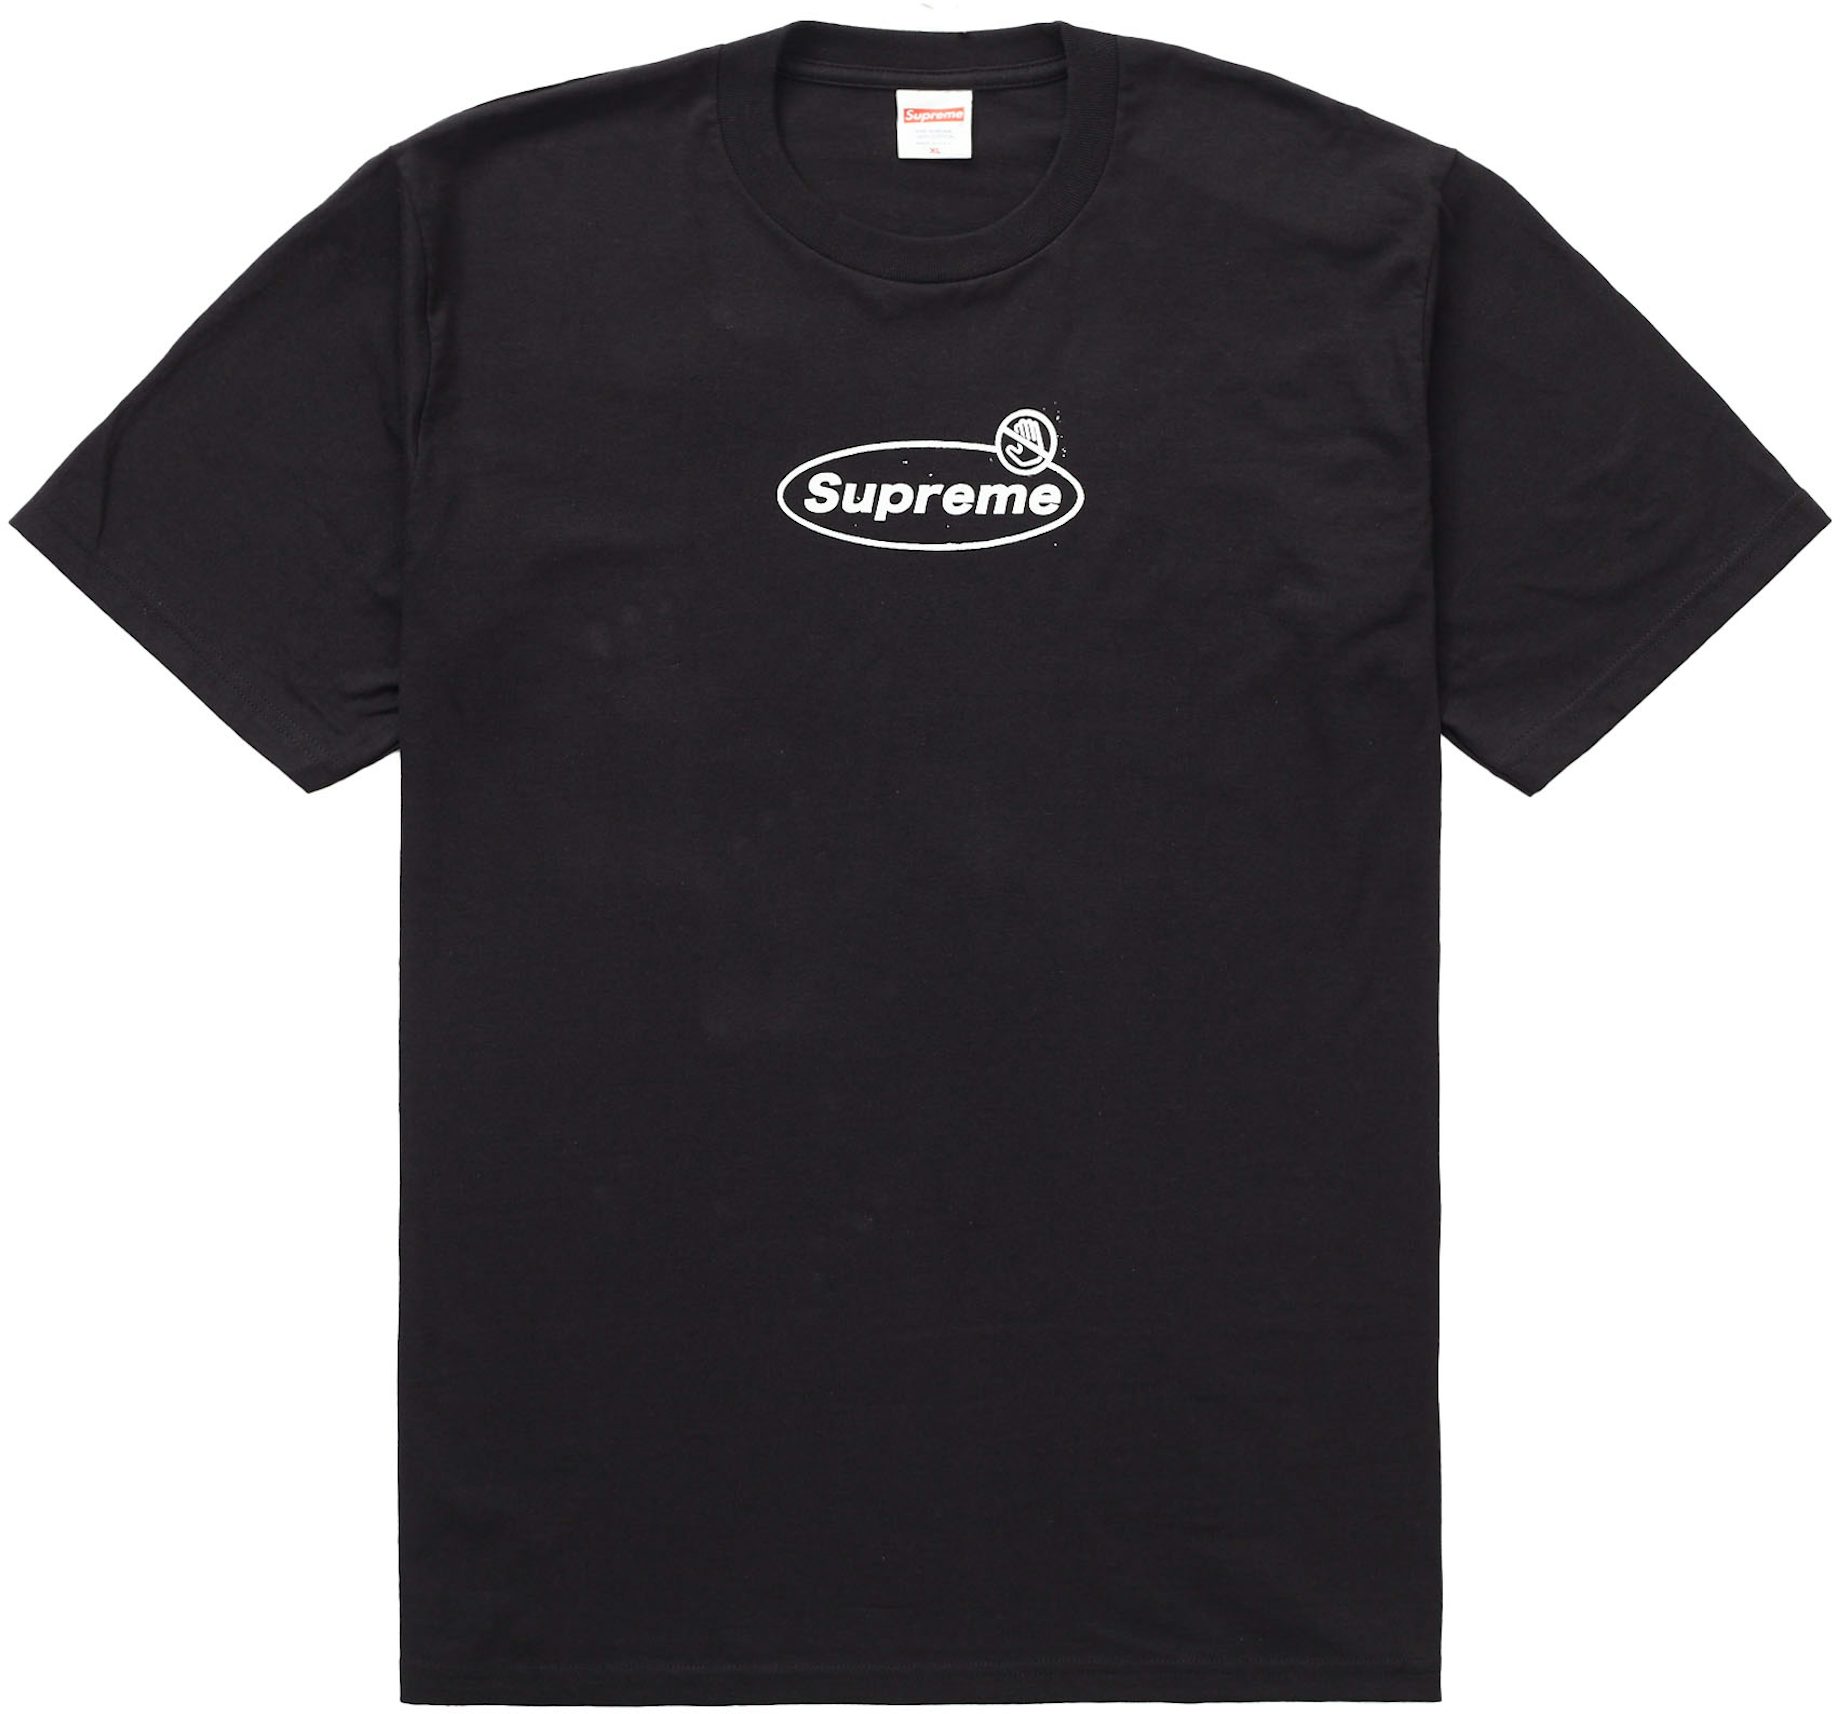 Supreme Person Tee / t shirt. Black. Large. Confirmed Order. Fast Shipping.